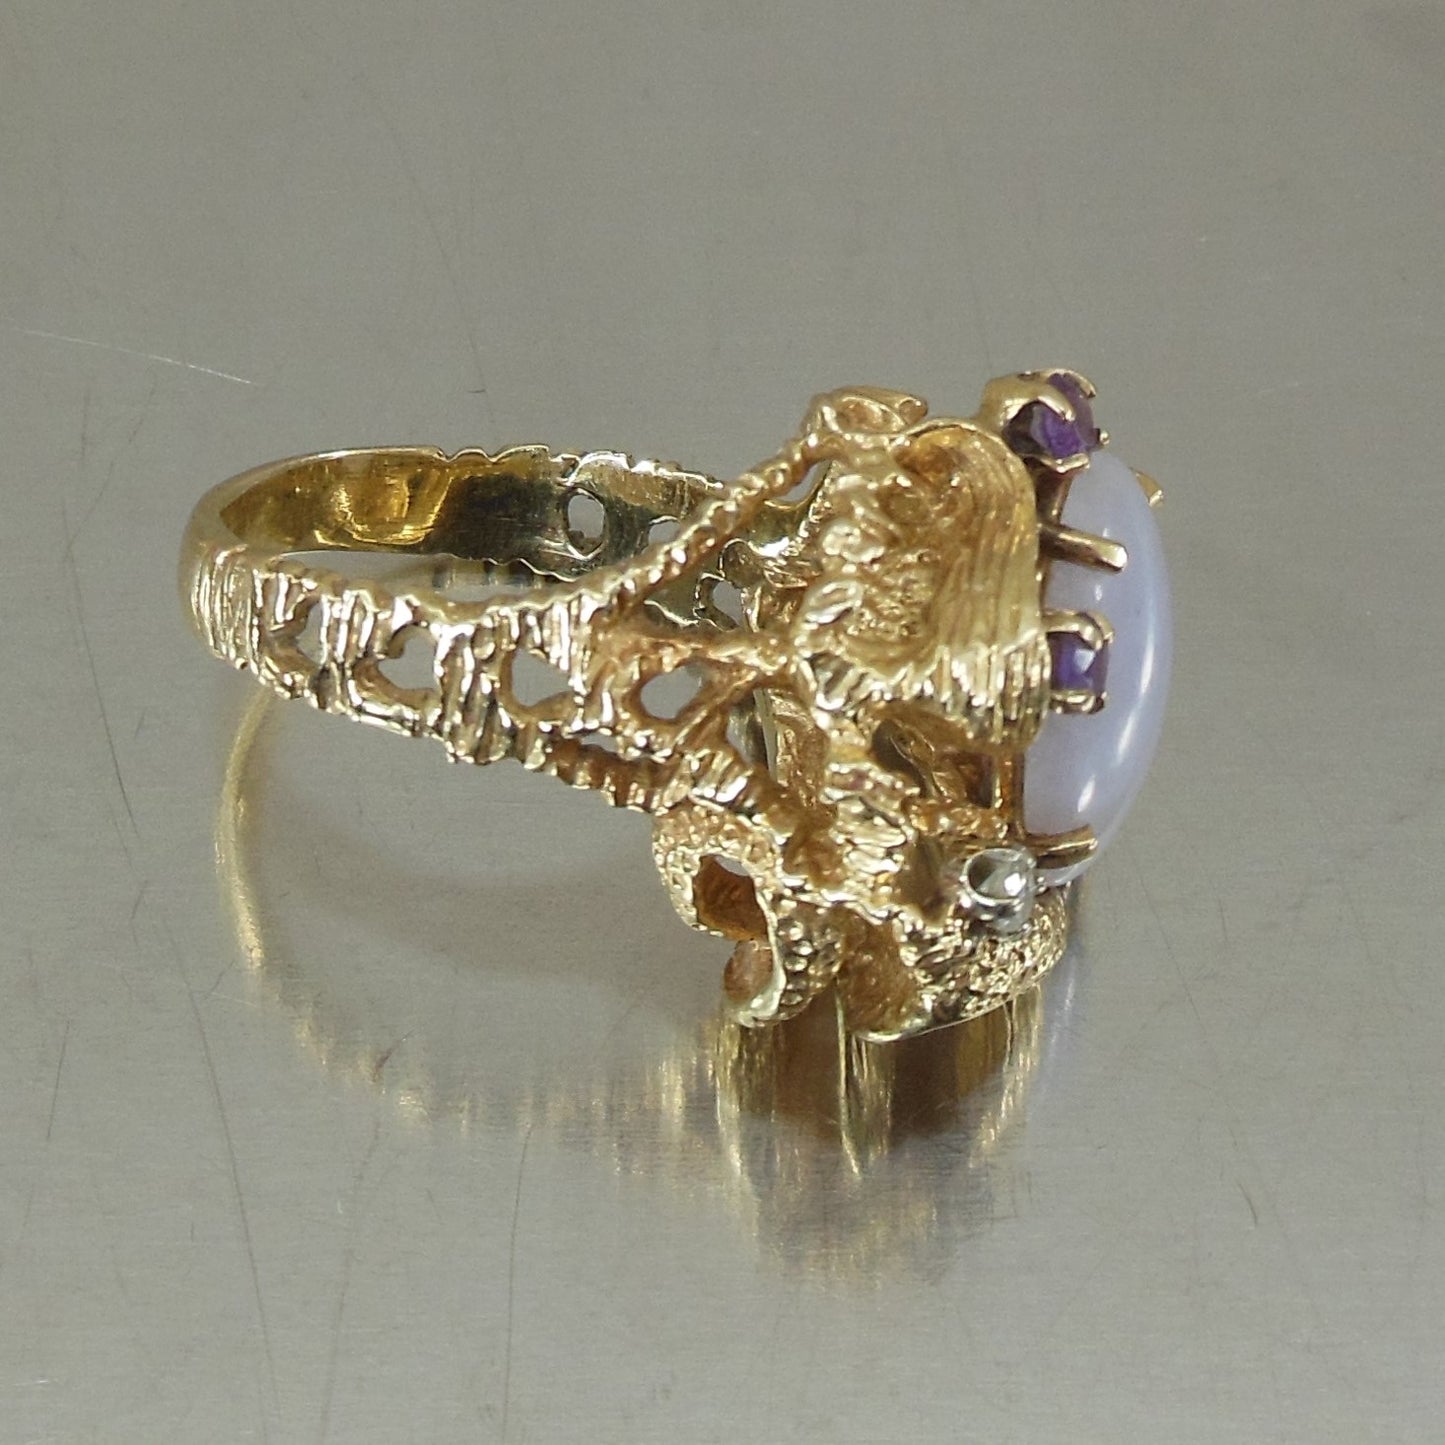 Cocktail Ring Ornate 14K Yellow Gold Amethyst Diamond Cabochon Size 7.75 estate